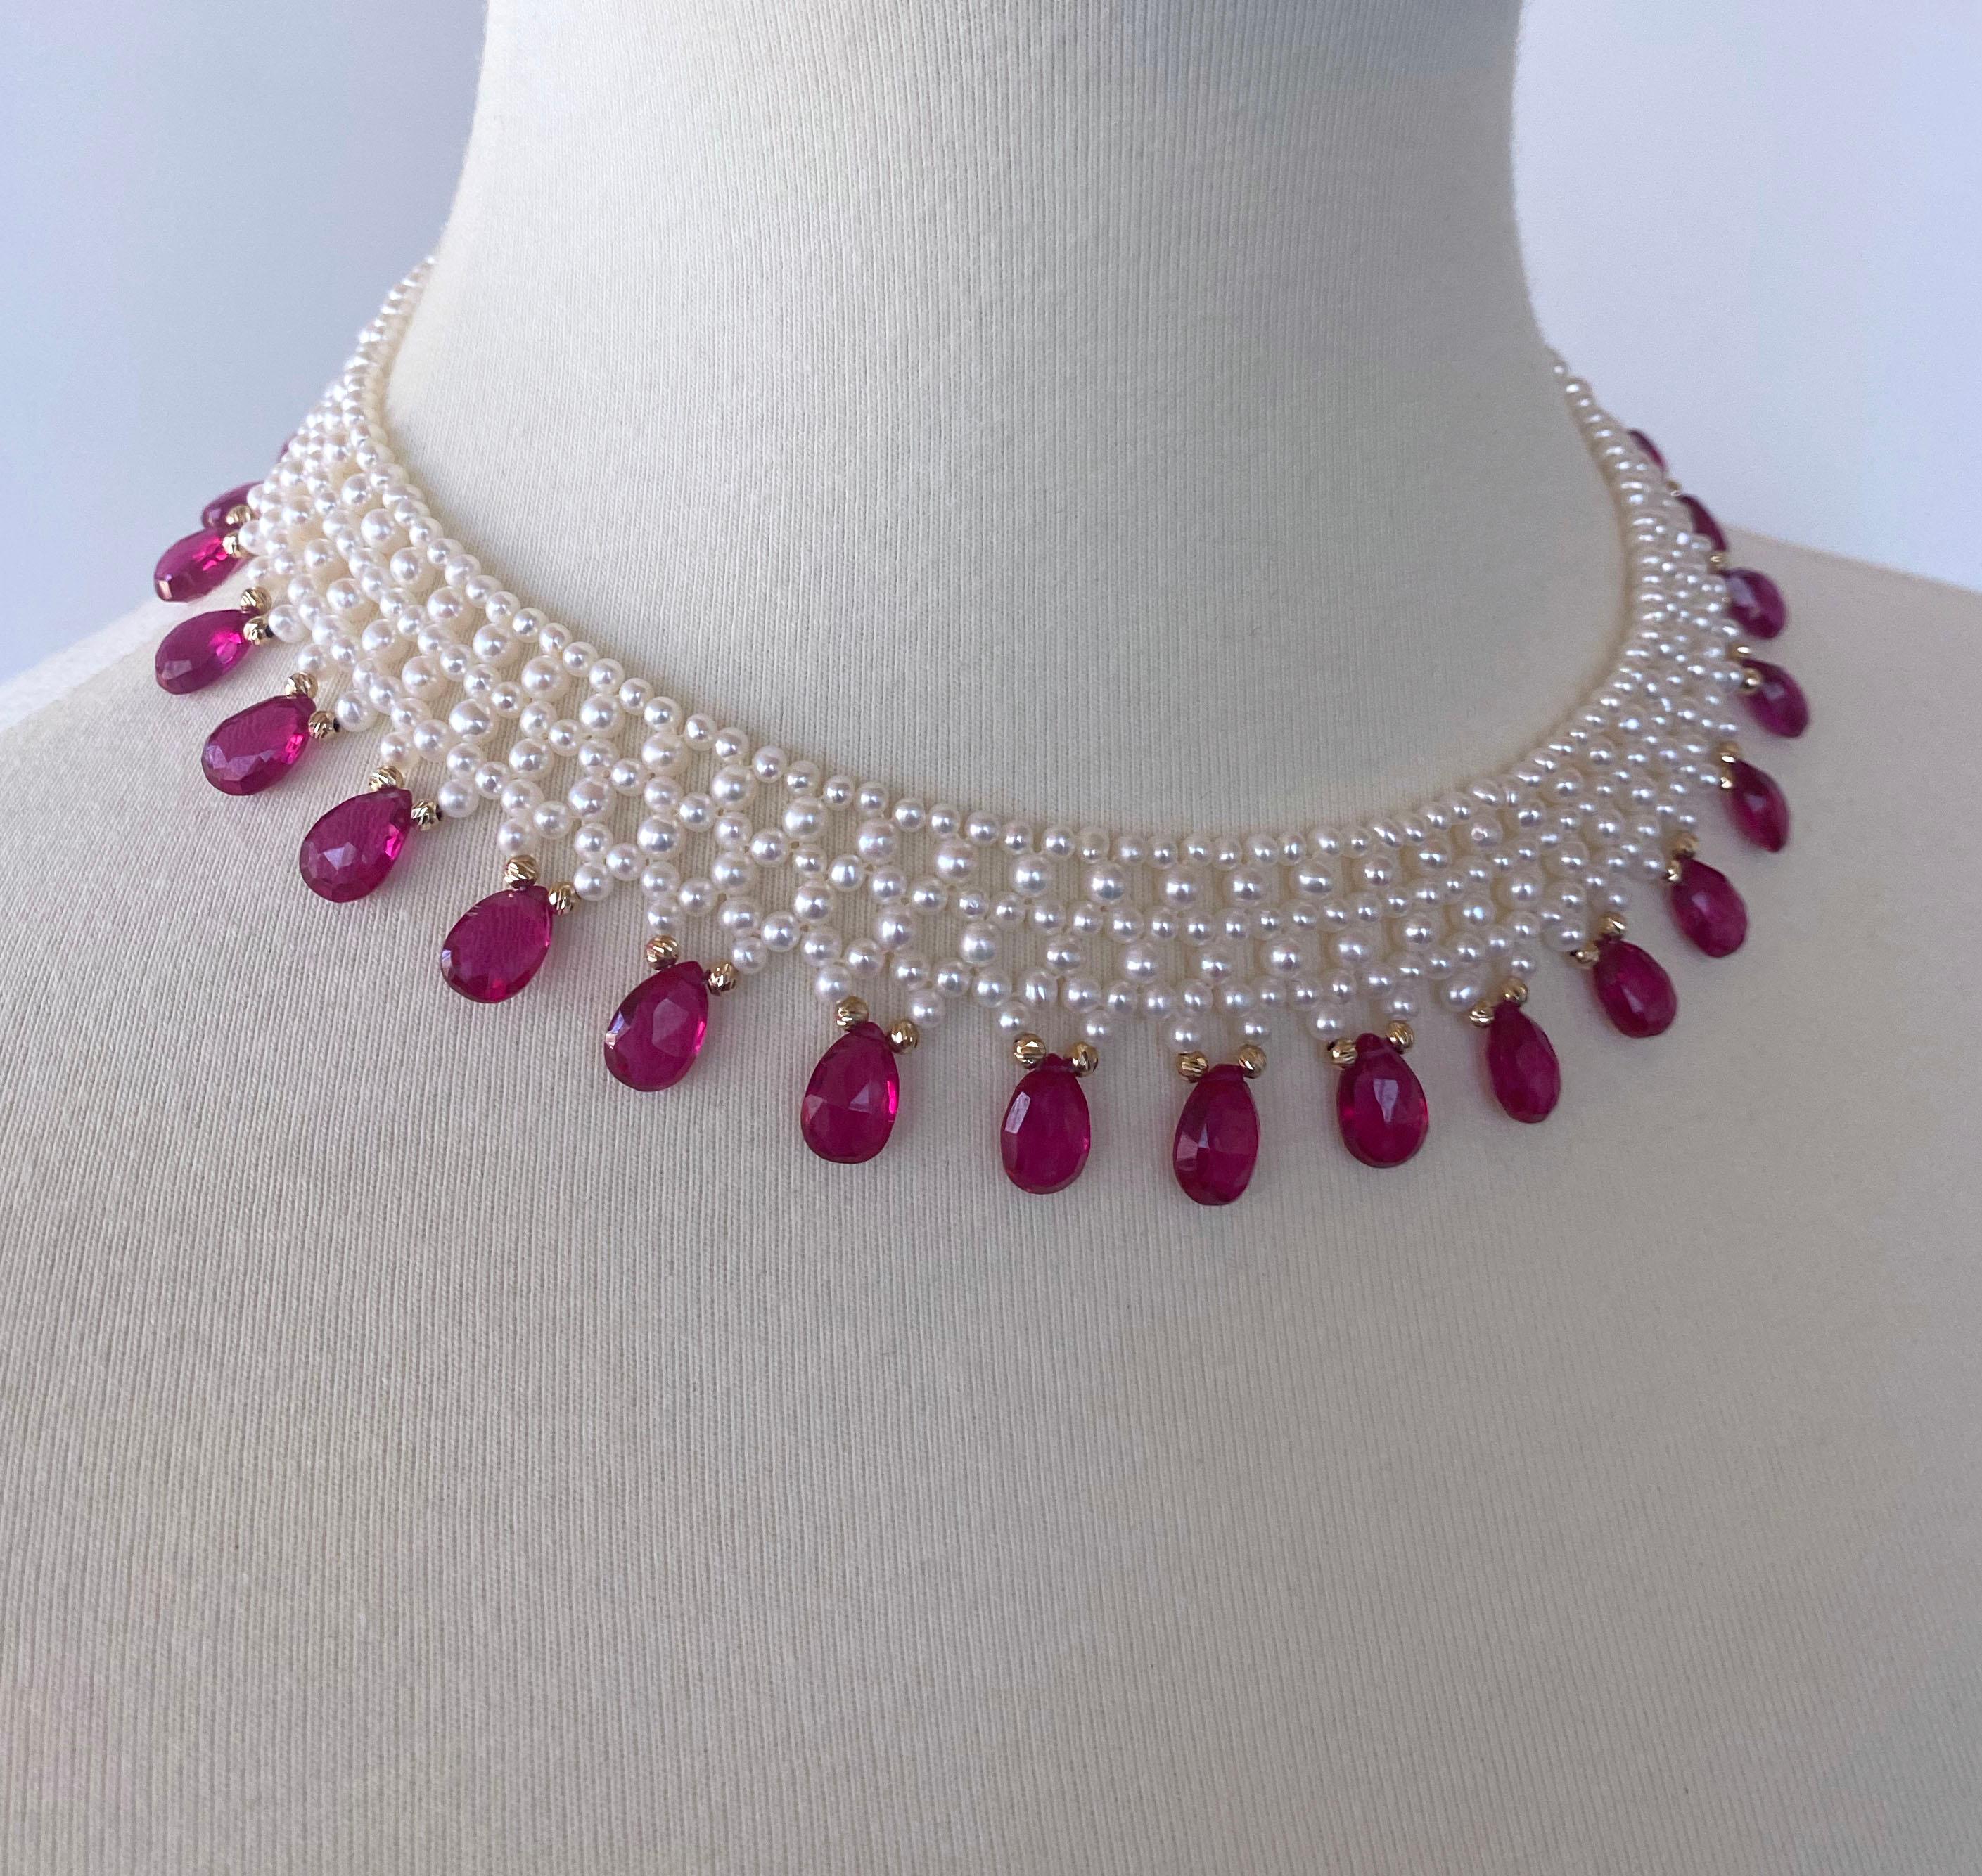 This gorgeous hand made pieces features high luster Cultured white Pearls which display a beautiful iridescence, all woven into a tight Lace like design. Stunning and highly saturated Pink Sapphires adorn this necklace and are further accented by